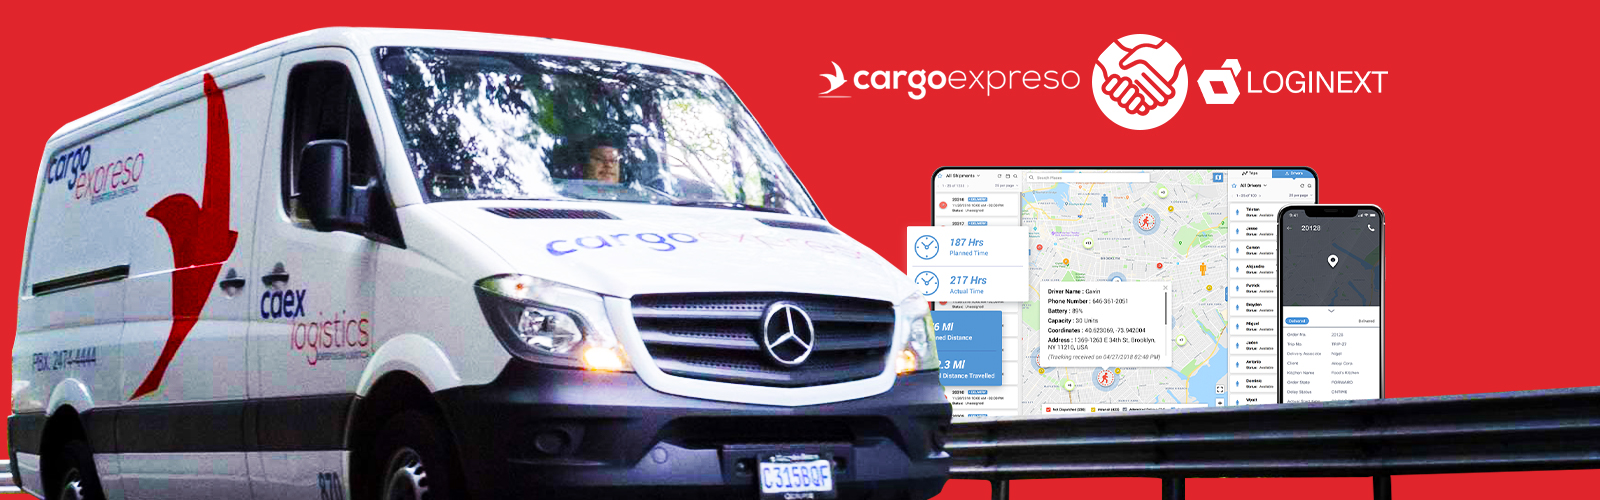 Cargo Expreso expects to increase market share in express deliveries with LogiNext and Oracle powered technology